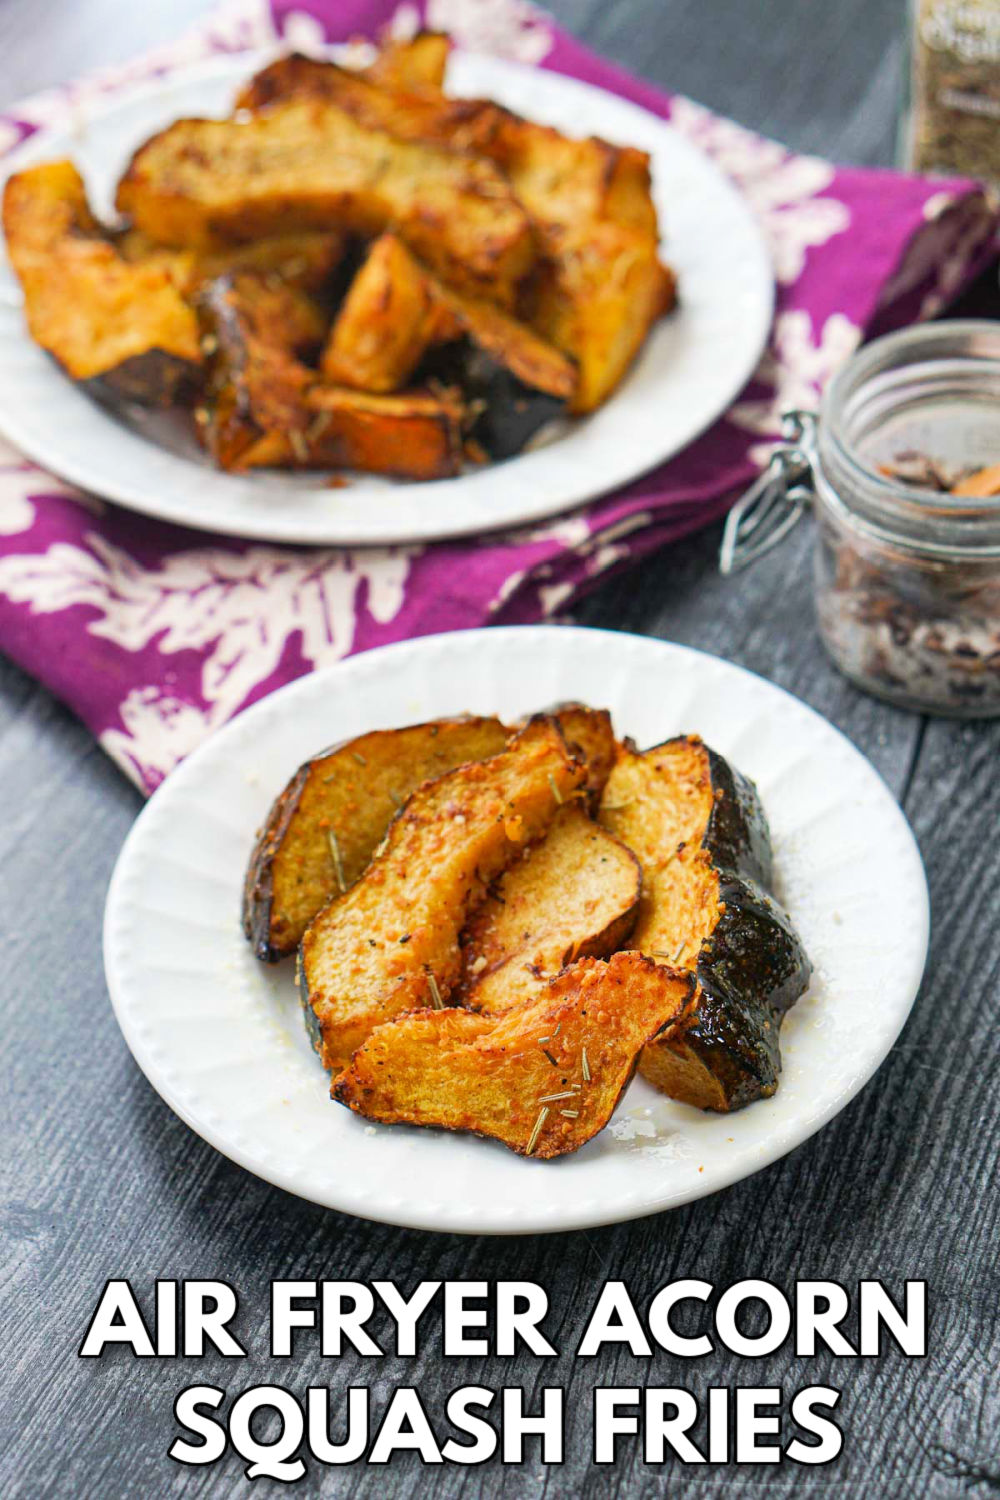 plates with acorn squash fries made in air fryer and text